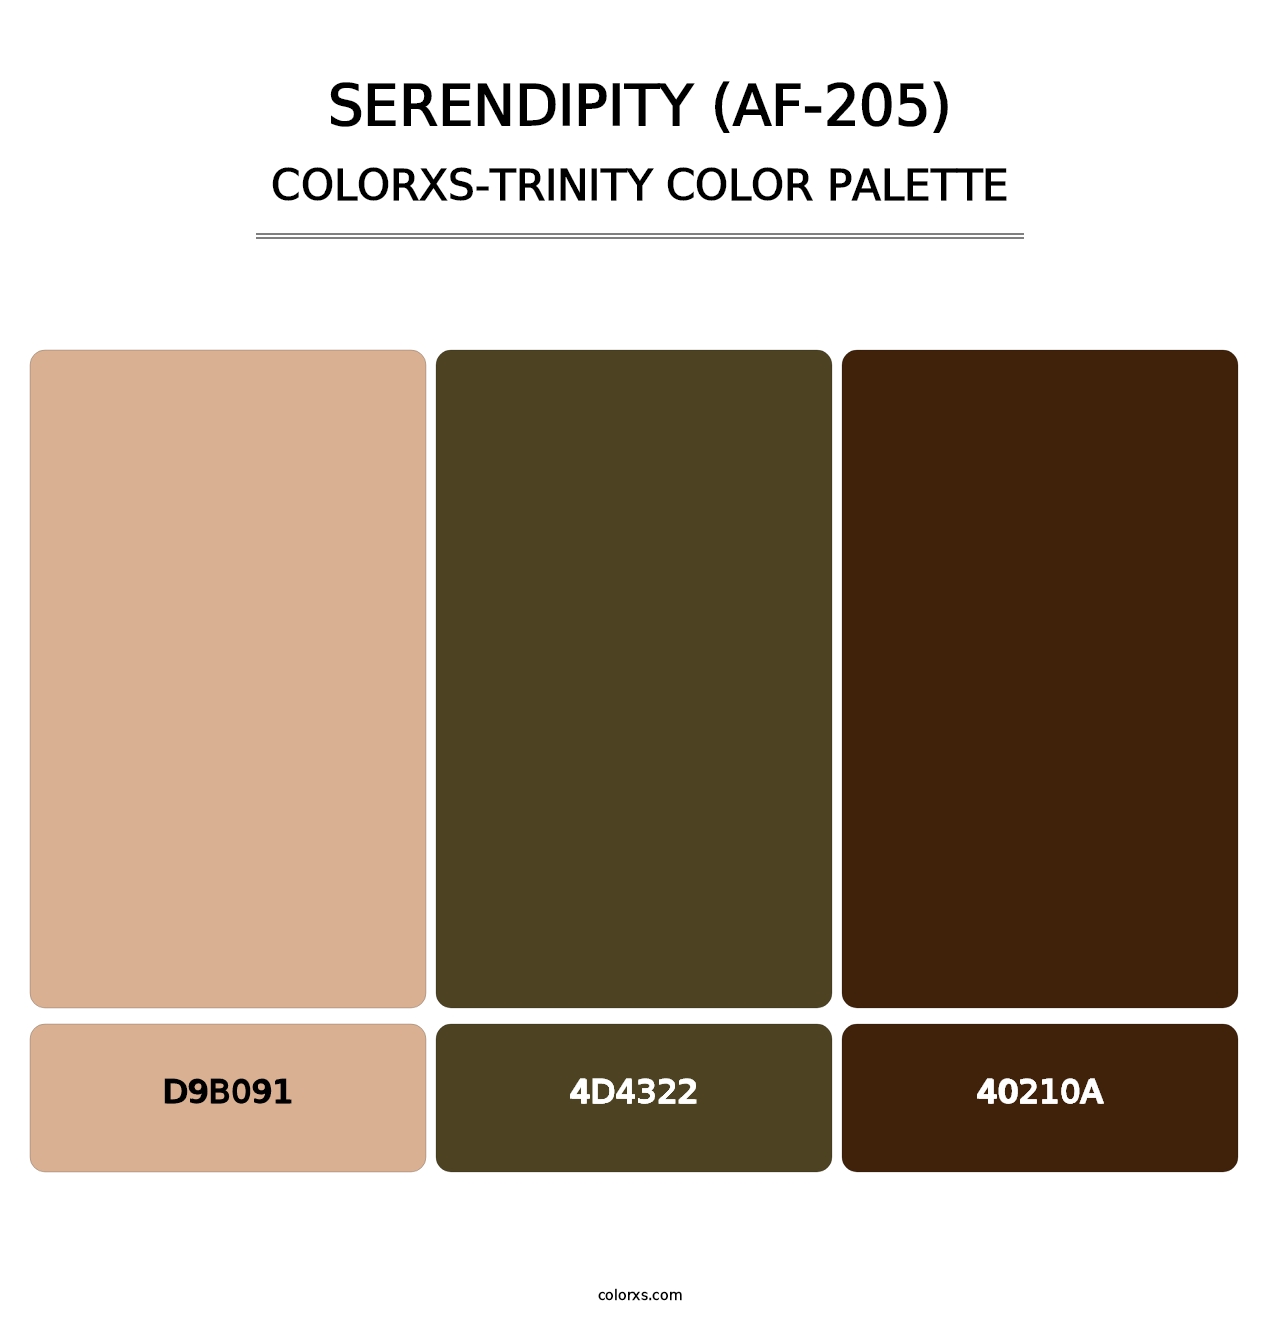 Serendipity (AF-205) - Colorxs Trinity Palette